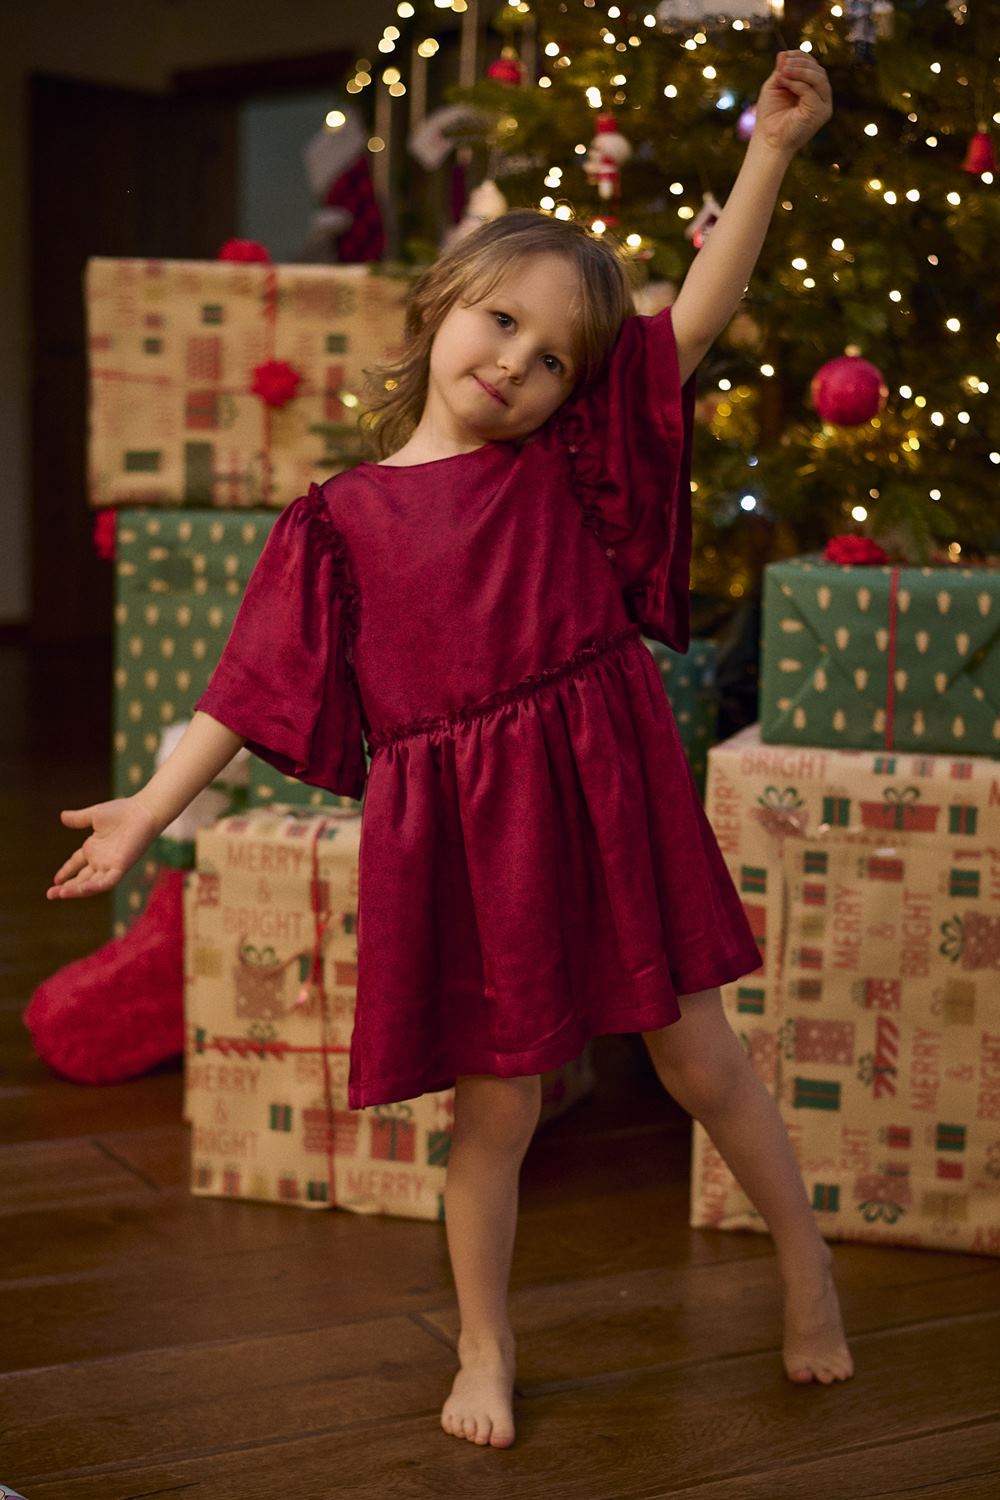 The Red Jolly dress for girls